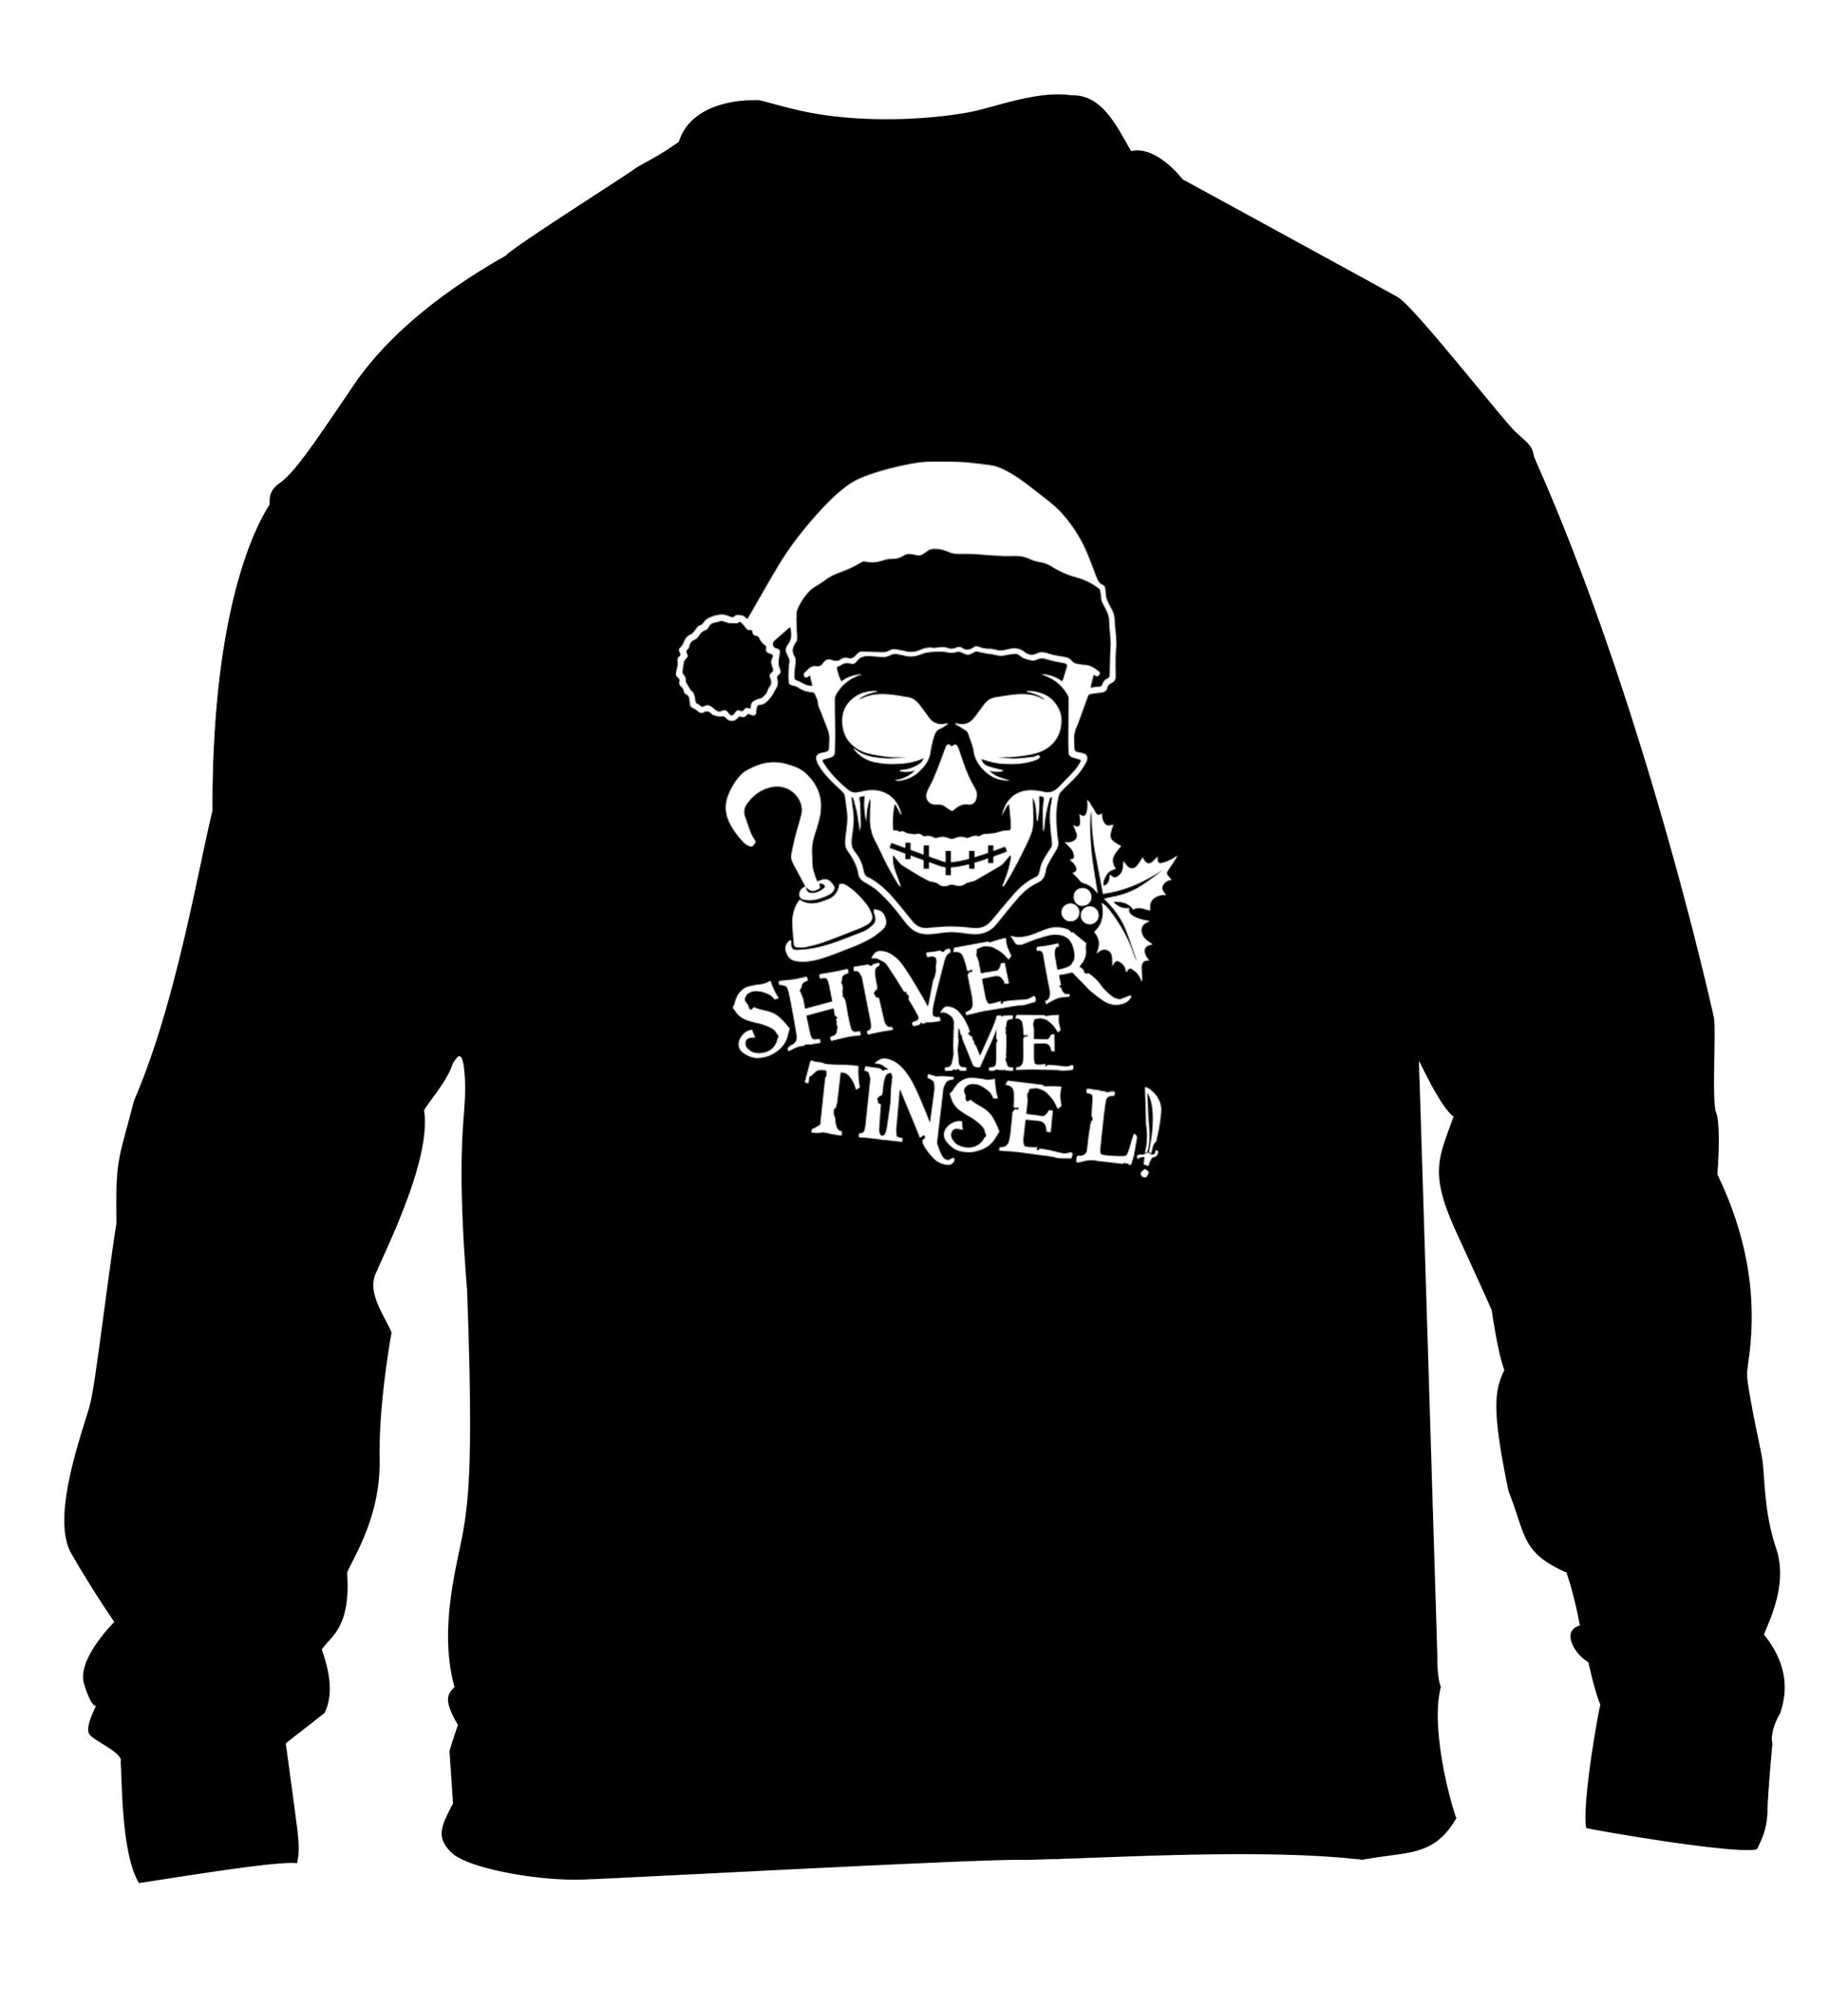 Shiver me tinsel children's black sweater 12-14 Years